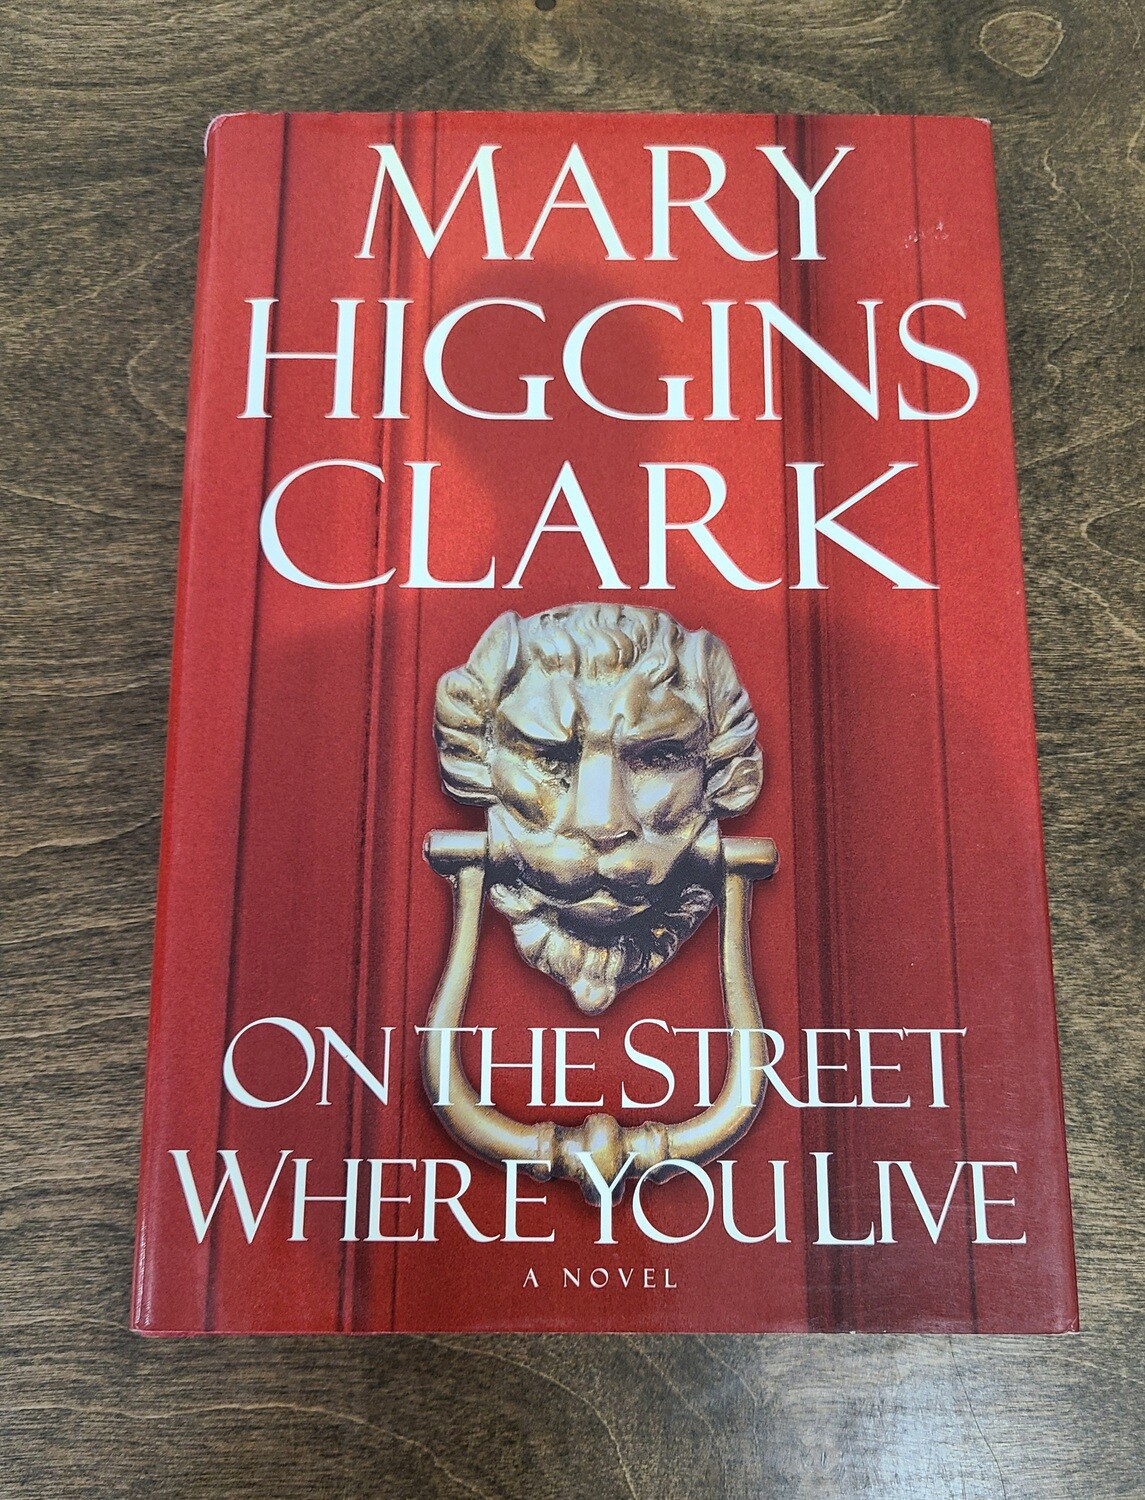 On the Street Where you Live by Mary Higgins Clark